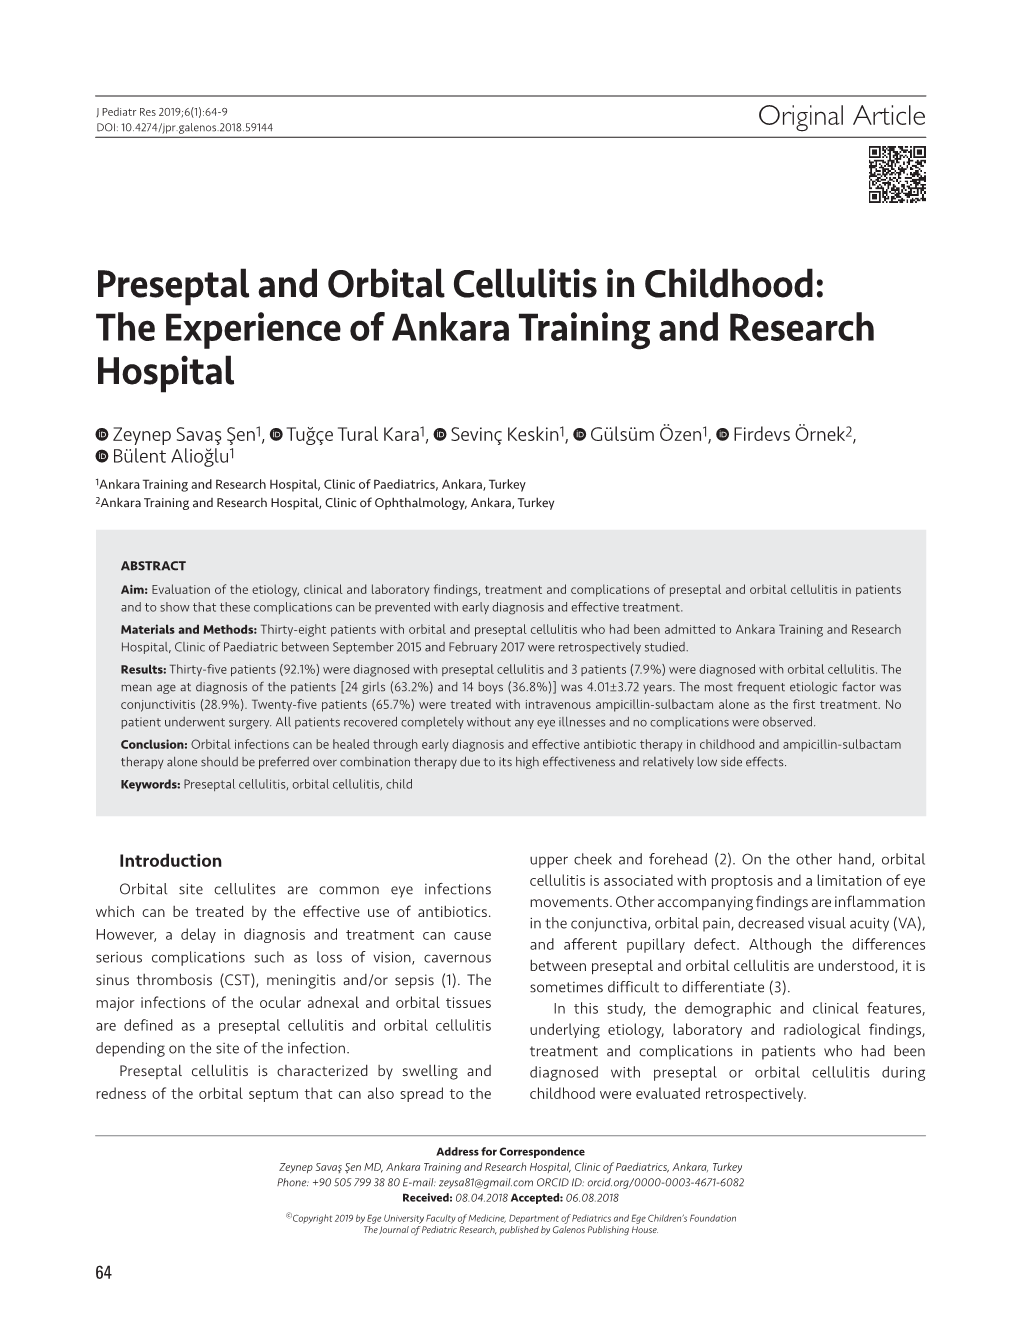 Preseptal and Orbital Cellulitis in Childhood: the Experience of Ankara Training and Research Hospital